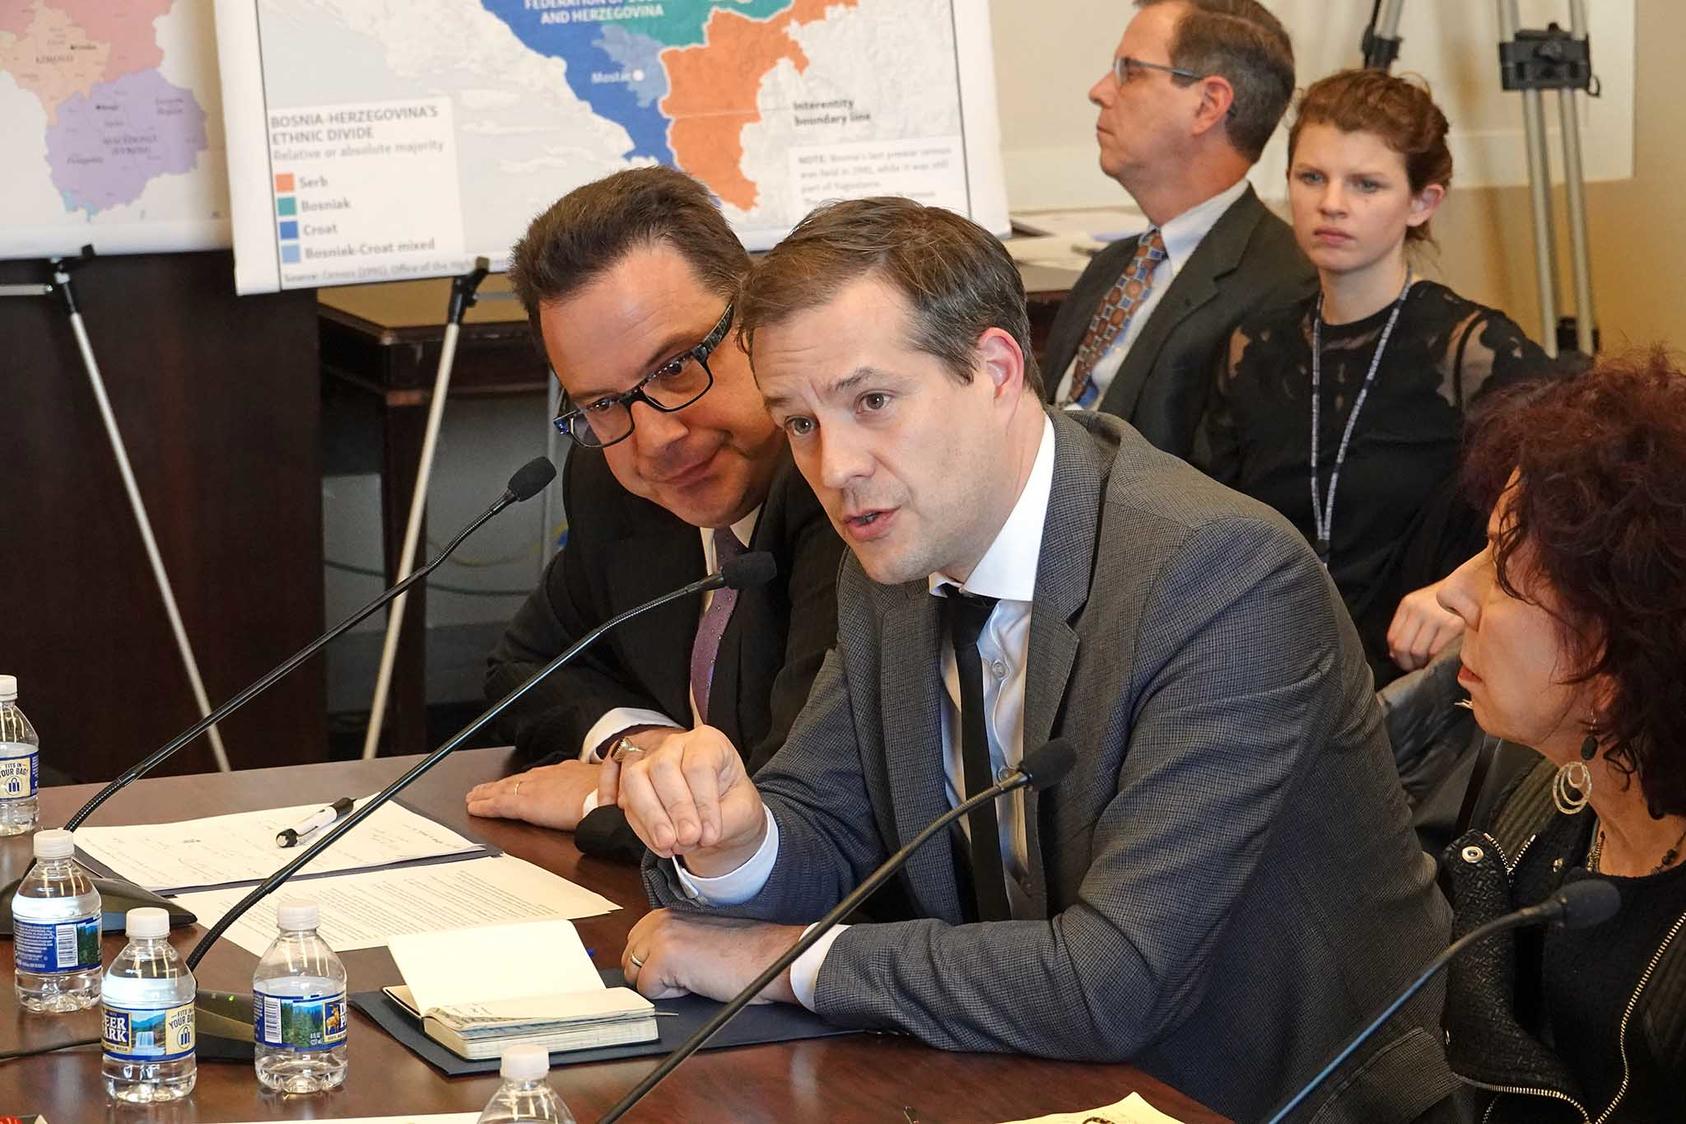 Phillipe Leroux-Martin testifying in front of the House Foreign Affairs Committee on April 18, 2018.